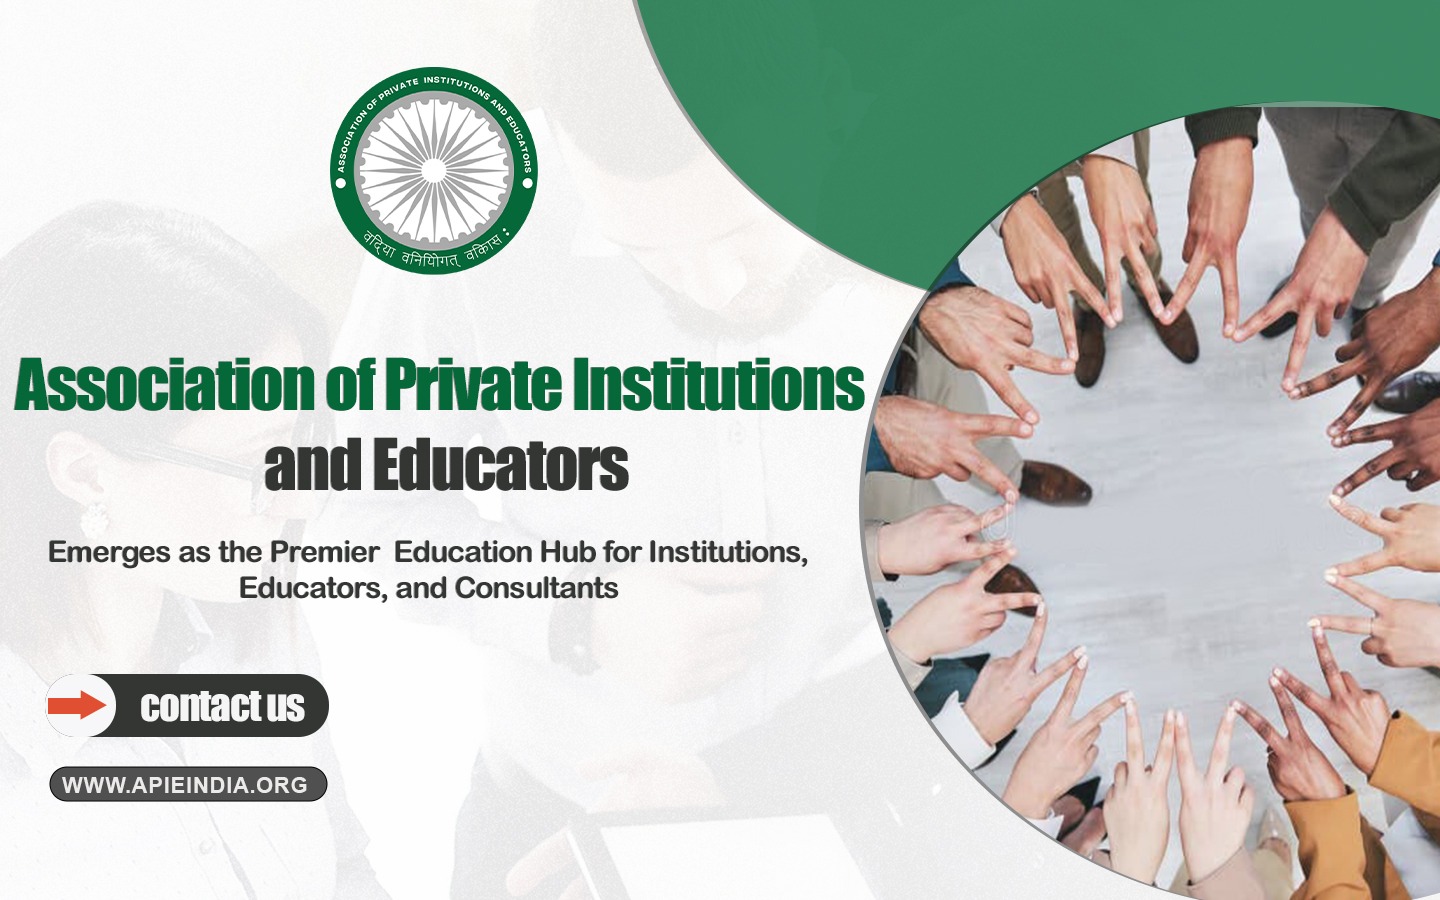 APIE – Association of Private Institutions and Educators Emerges as the Premier Education Hub for Institutions, Educators, and Consultants